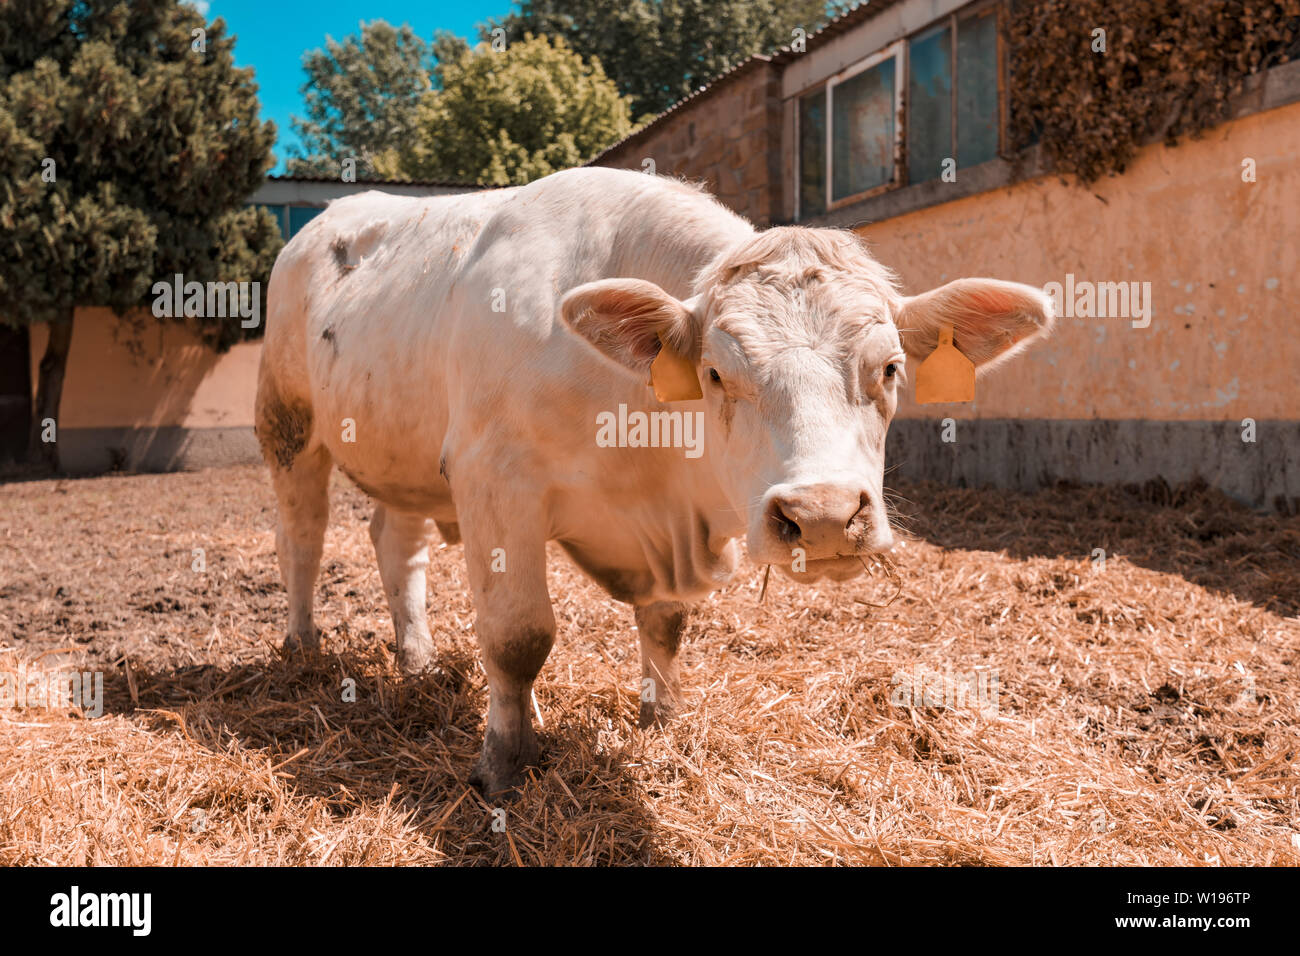 White cow on livestock dairy farm looking at camera Stock Photo